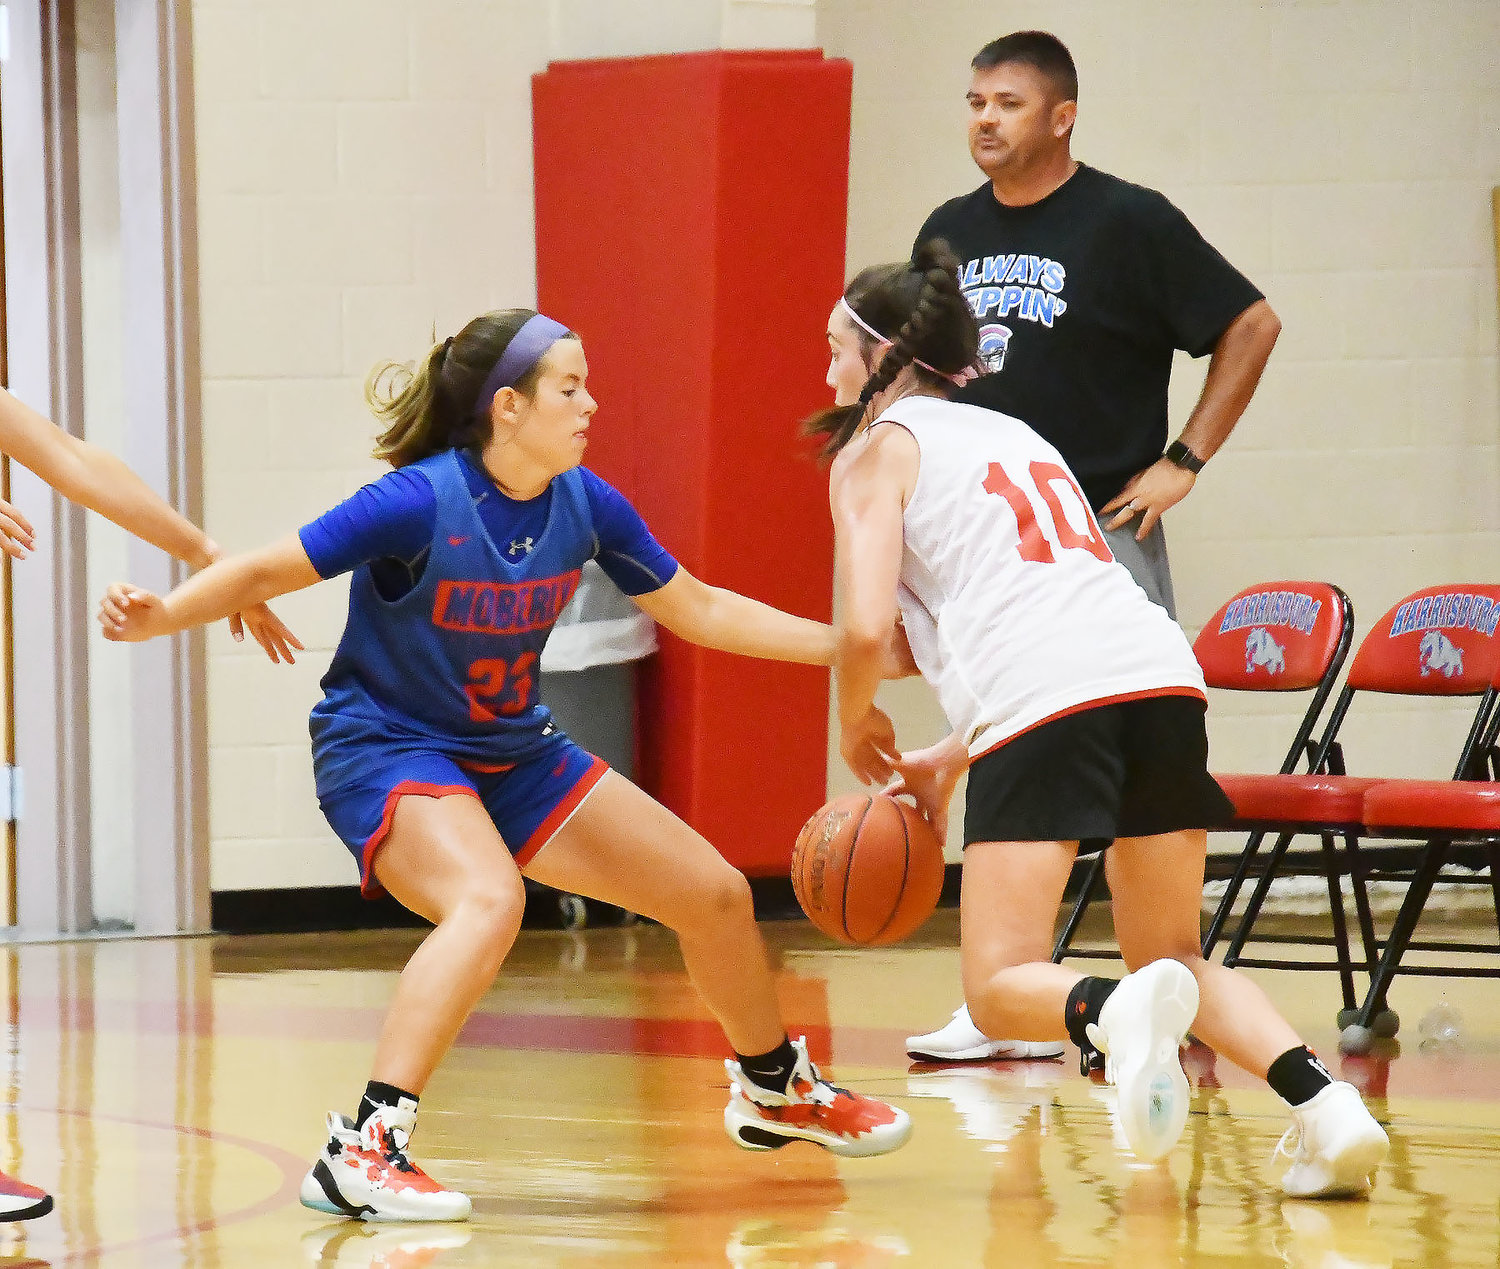 Kennedy Messer of Moberly defends a player from Chillicothe during a Tuesday morning scrimmage.